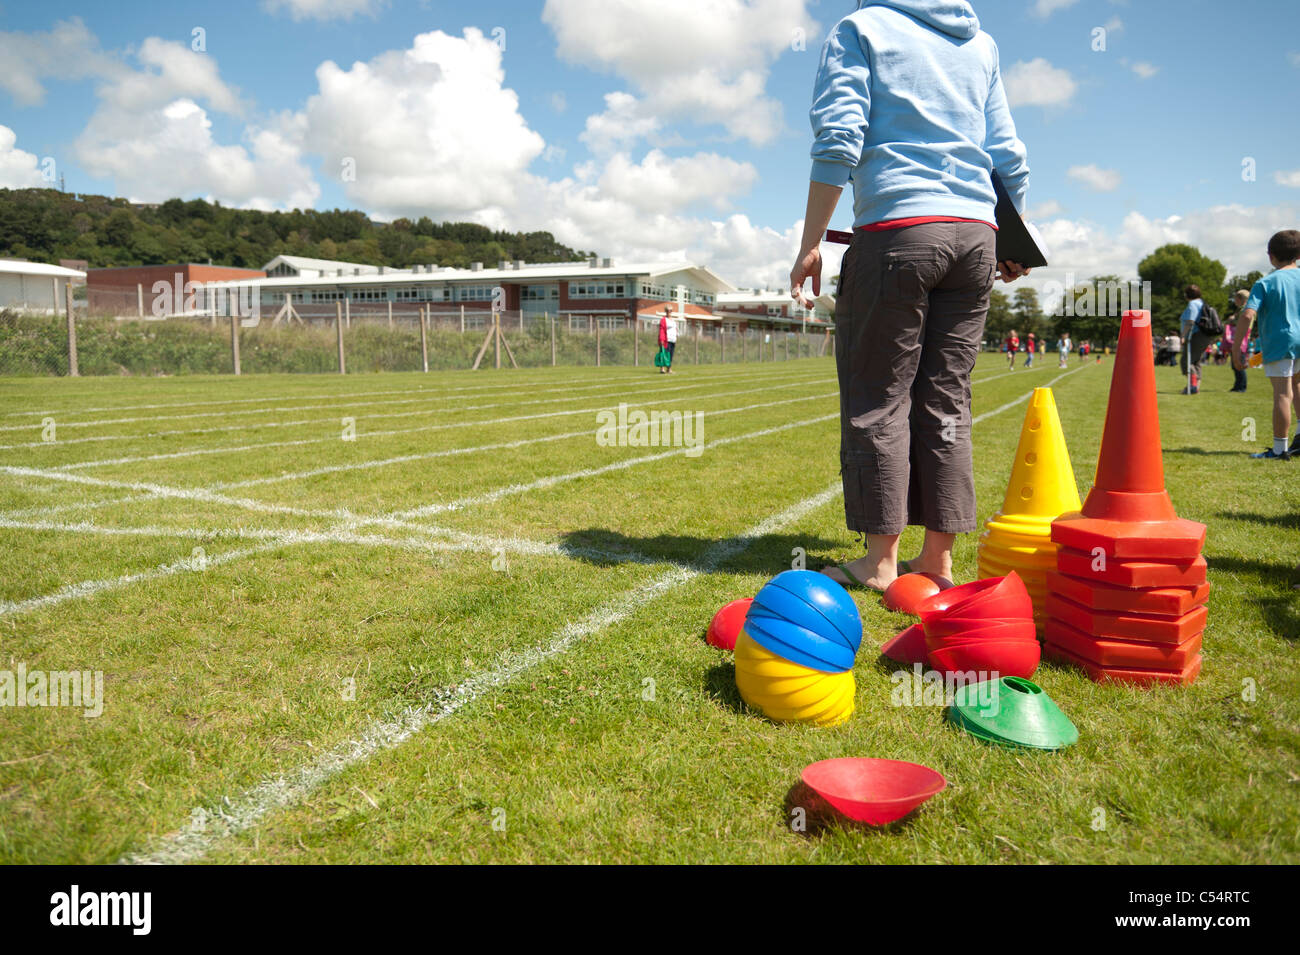 The racetrack at the annual School sports day at a small primary school, UK Stock Photo